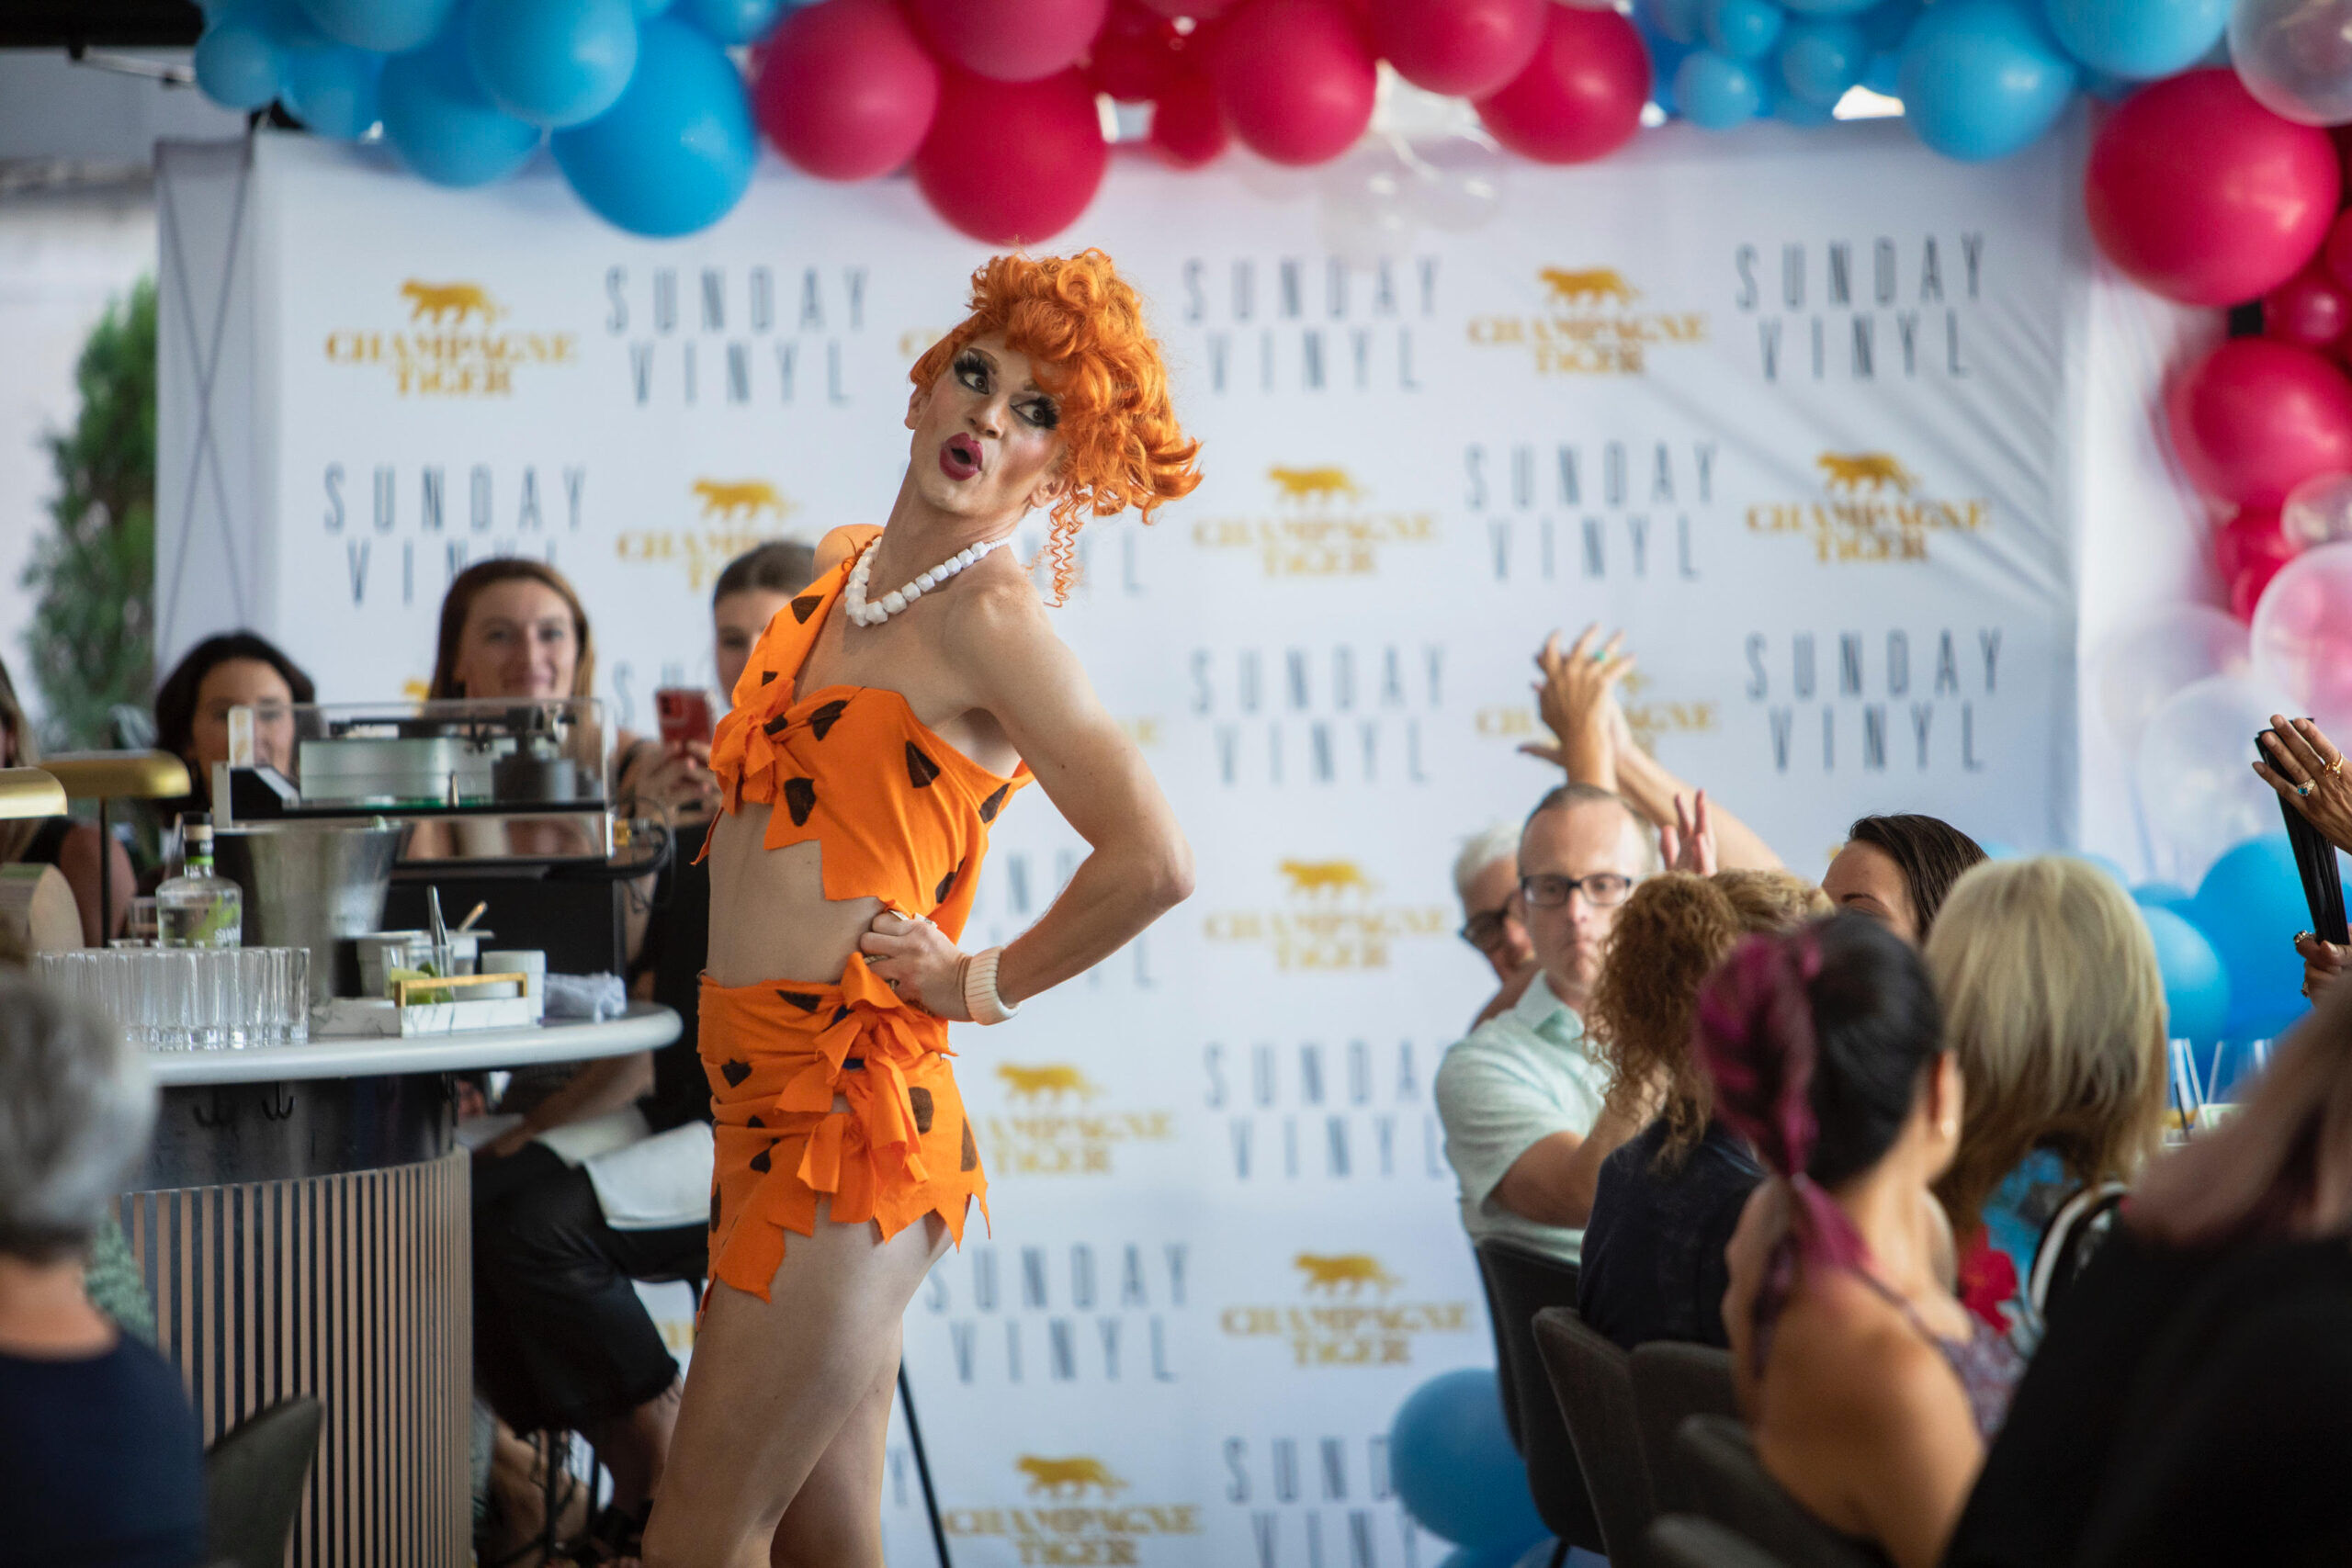 Pony the drag queen performing in a Flintstone ensemble